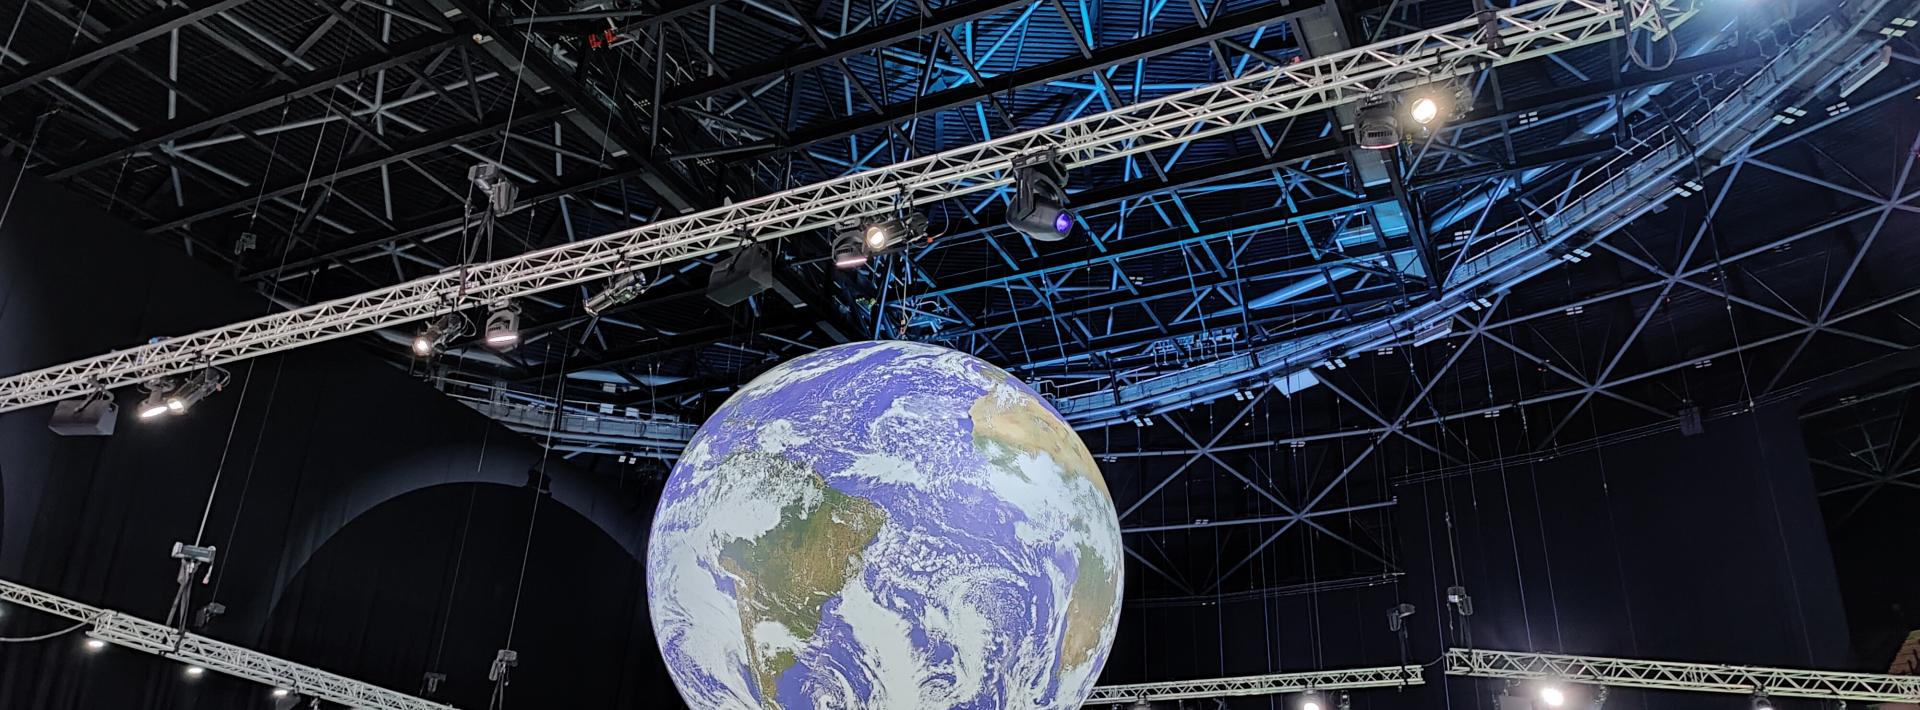 Action zone at the COP26 venue in Glasgow, Scotland where this rotating globe reminds delegates of what they are trying to save (Photo: Disha Shetty)